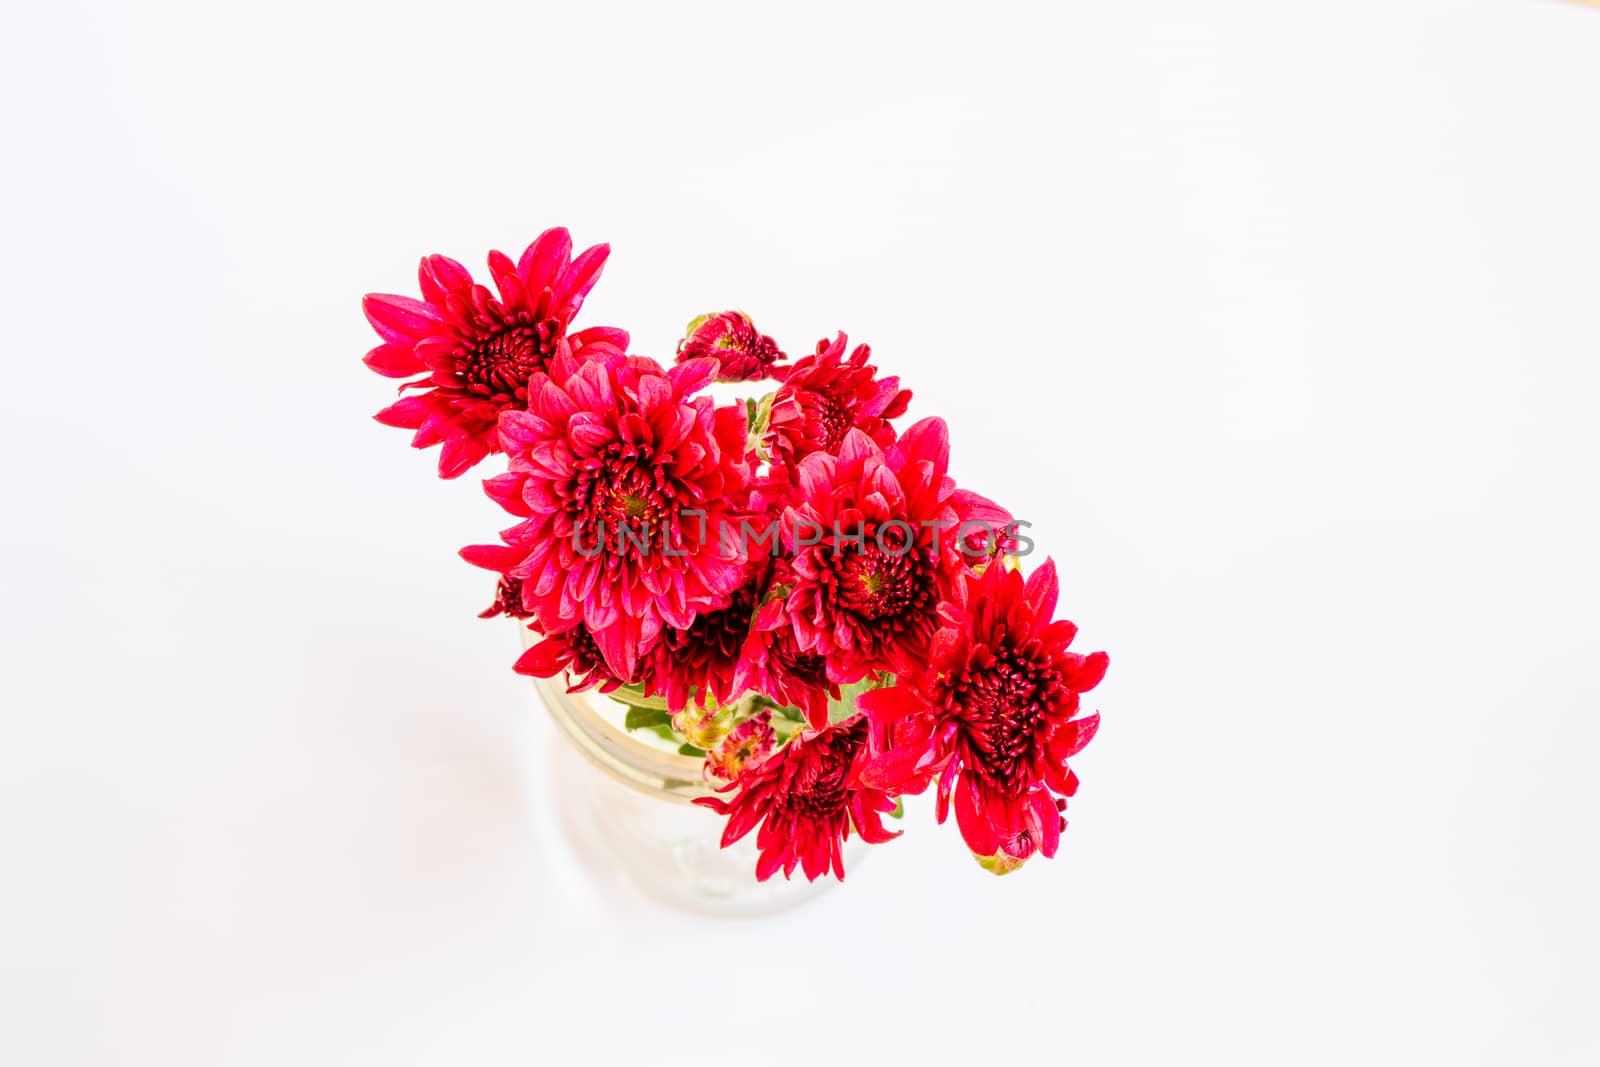 bouquet of red chrysanthemum  on black background by Khankeawsanan